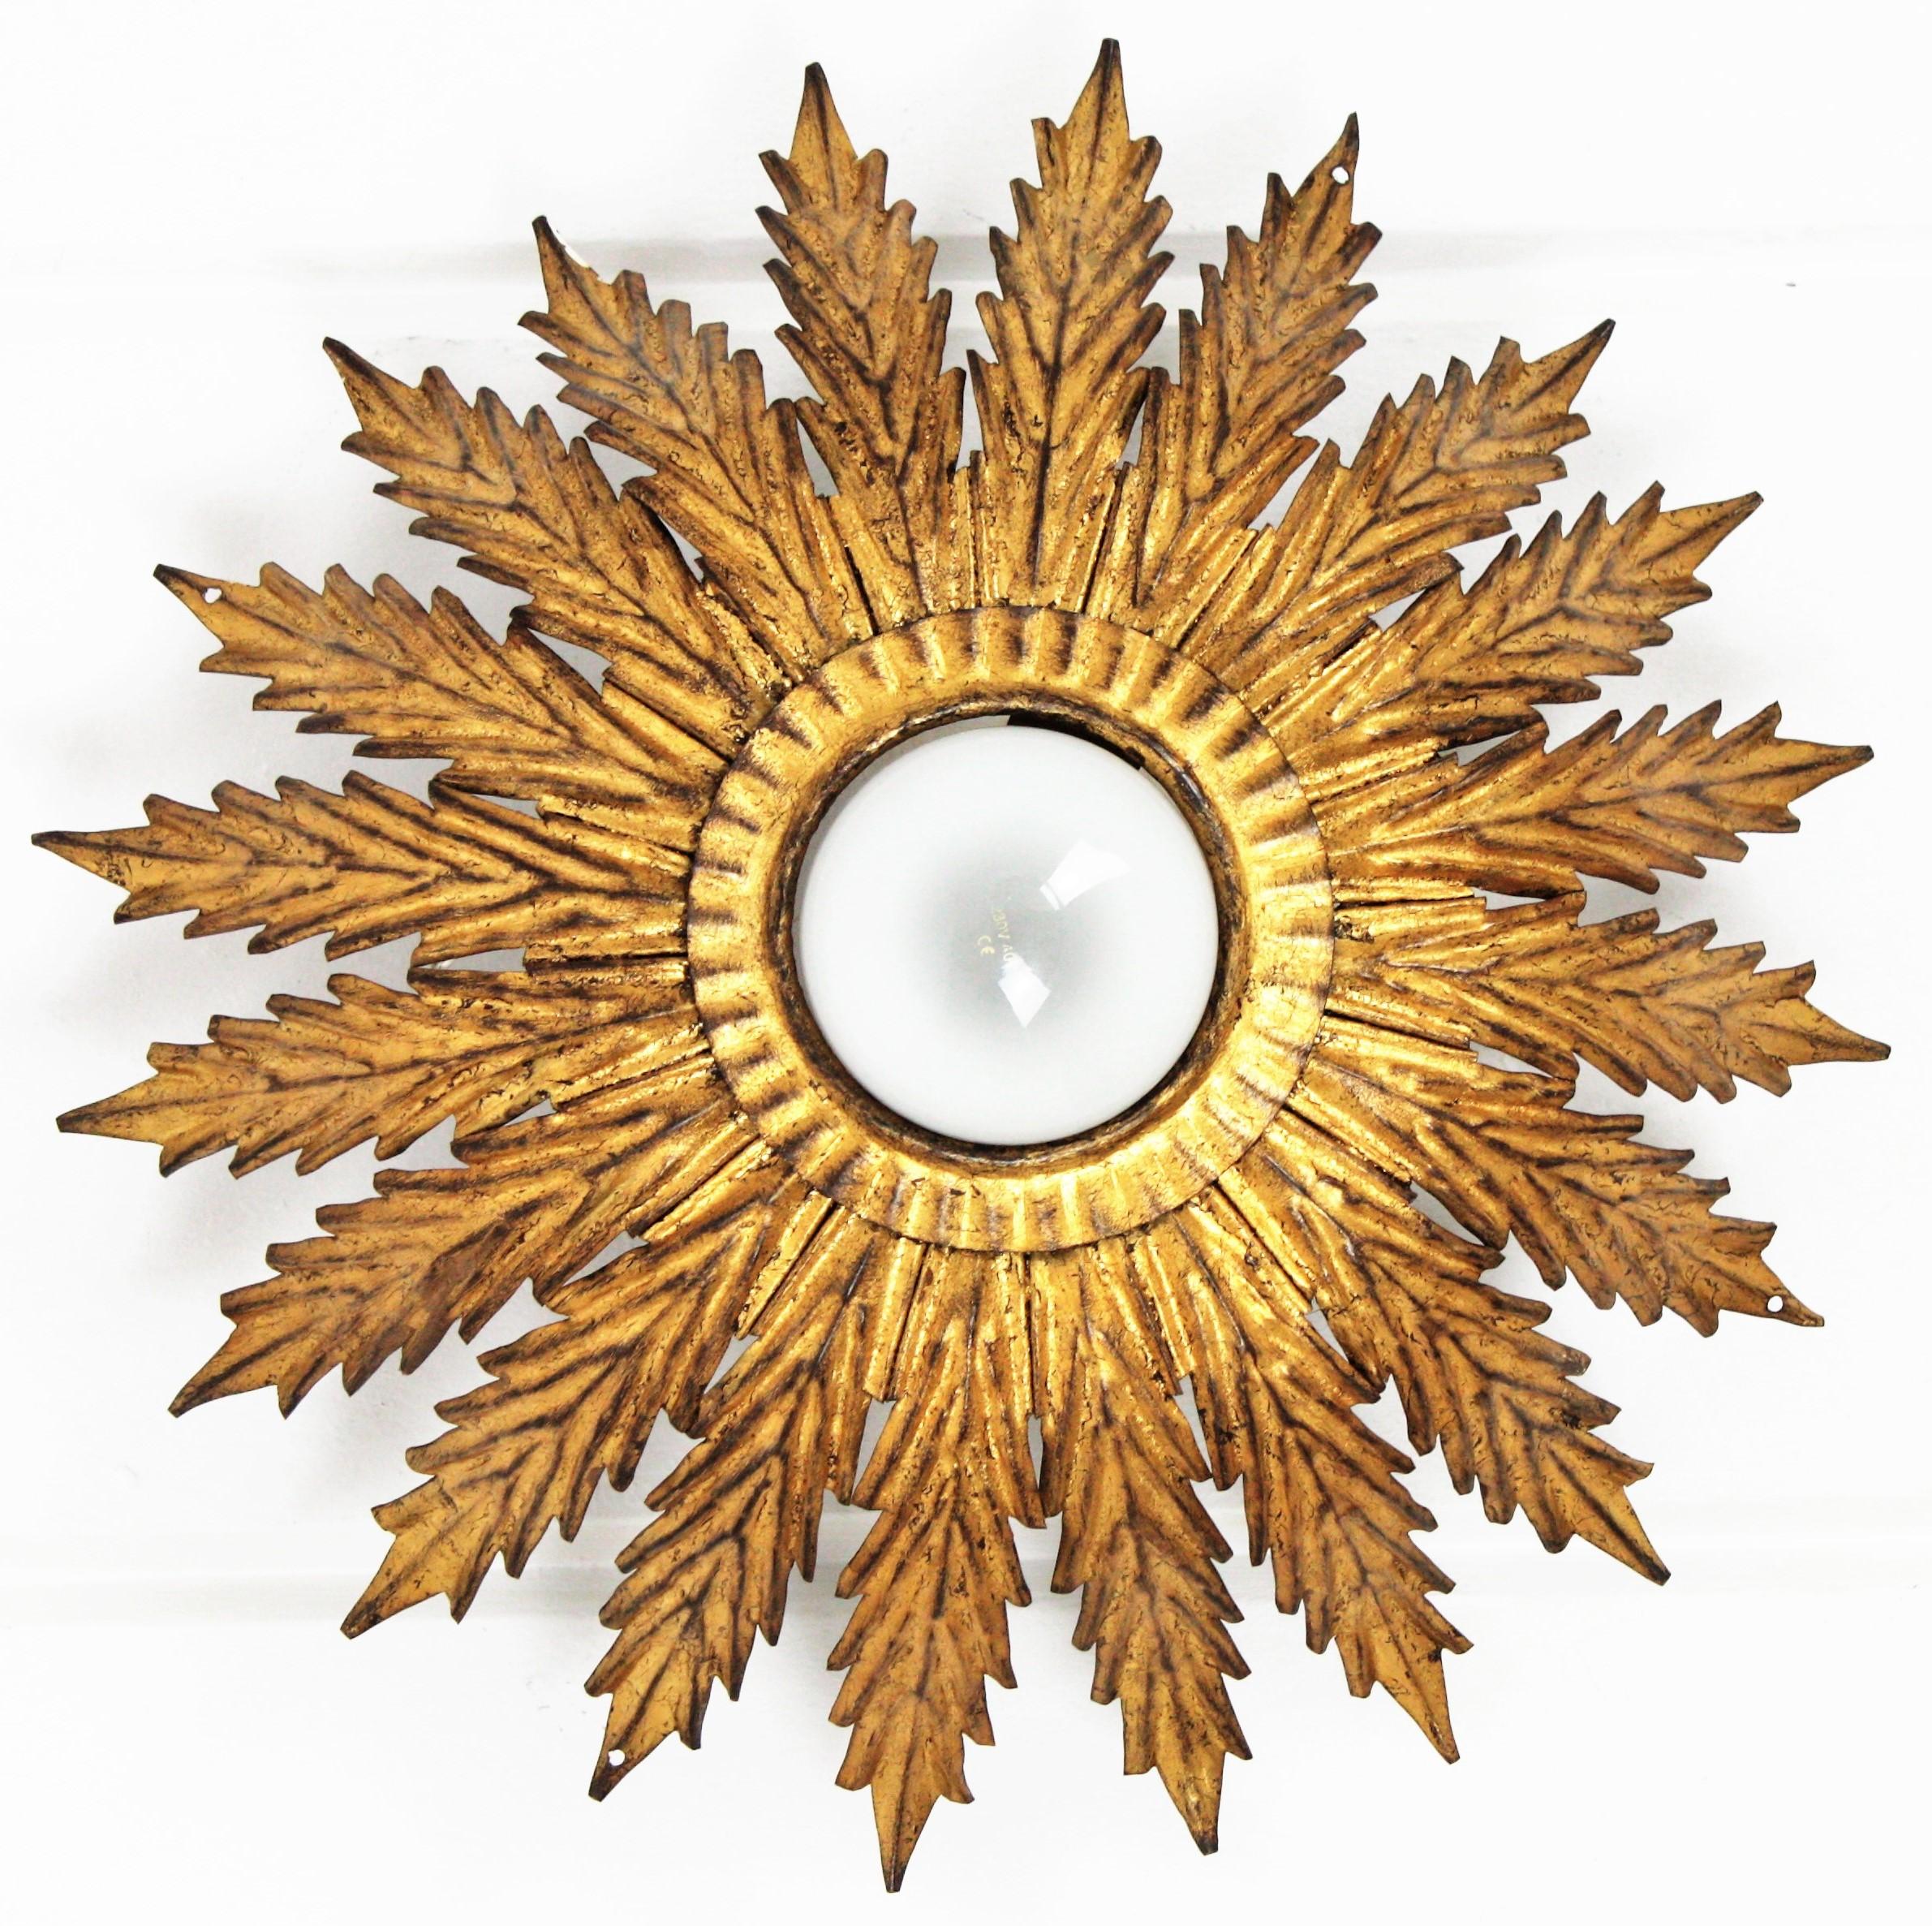 Elegant Hollywood Regency hand-hammered gilt iron sunburst flower light fixture / flush mount, France, 1940s-1950s.
This flush mount ceiling light features a wrought iron structure comprised by gold gilt iron scalloped leaves. The part surrounding